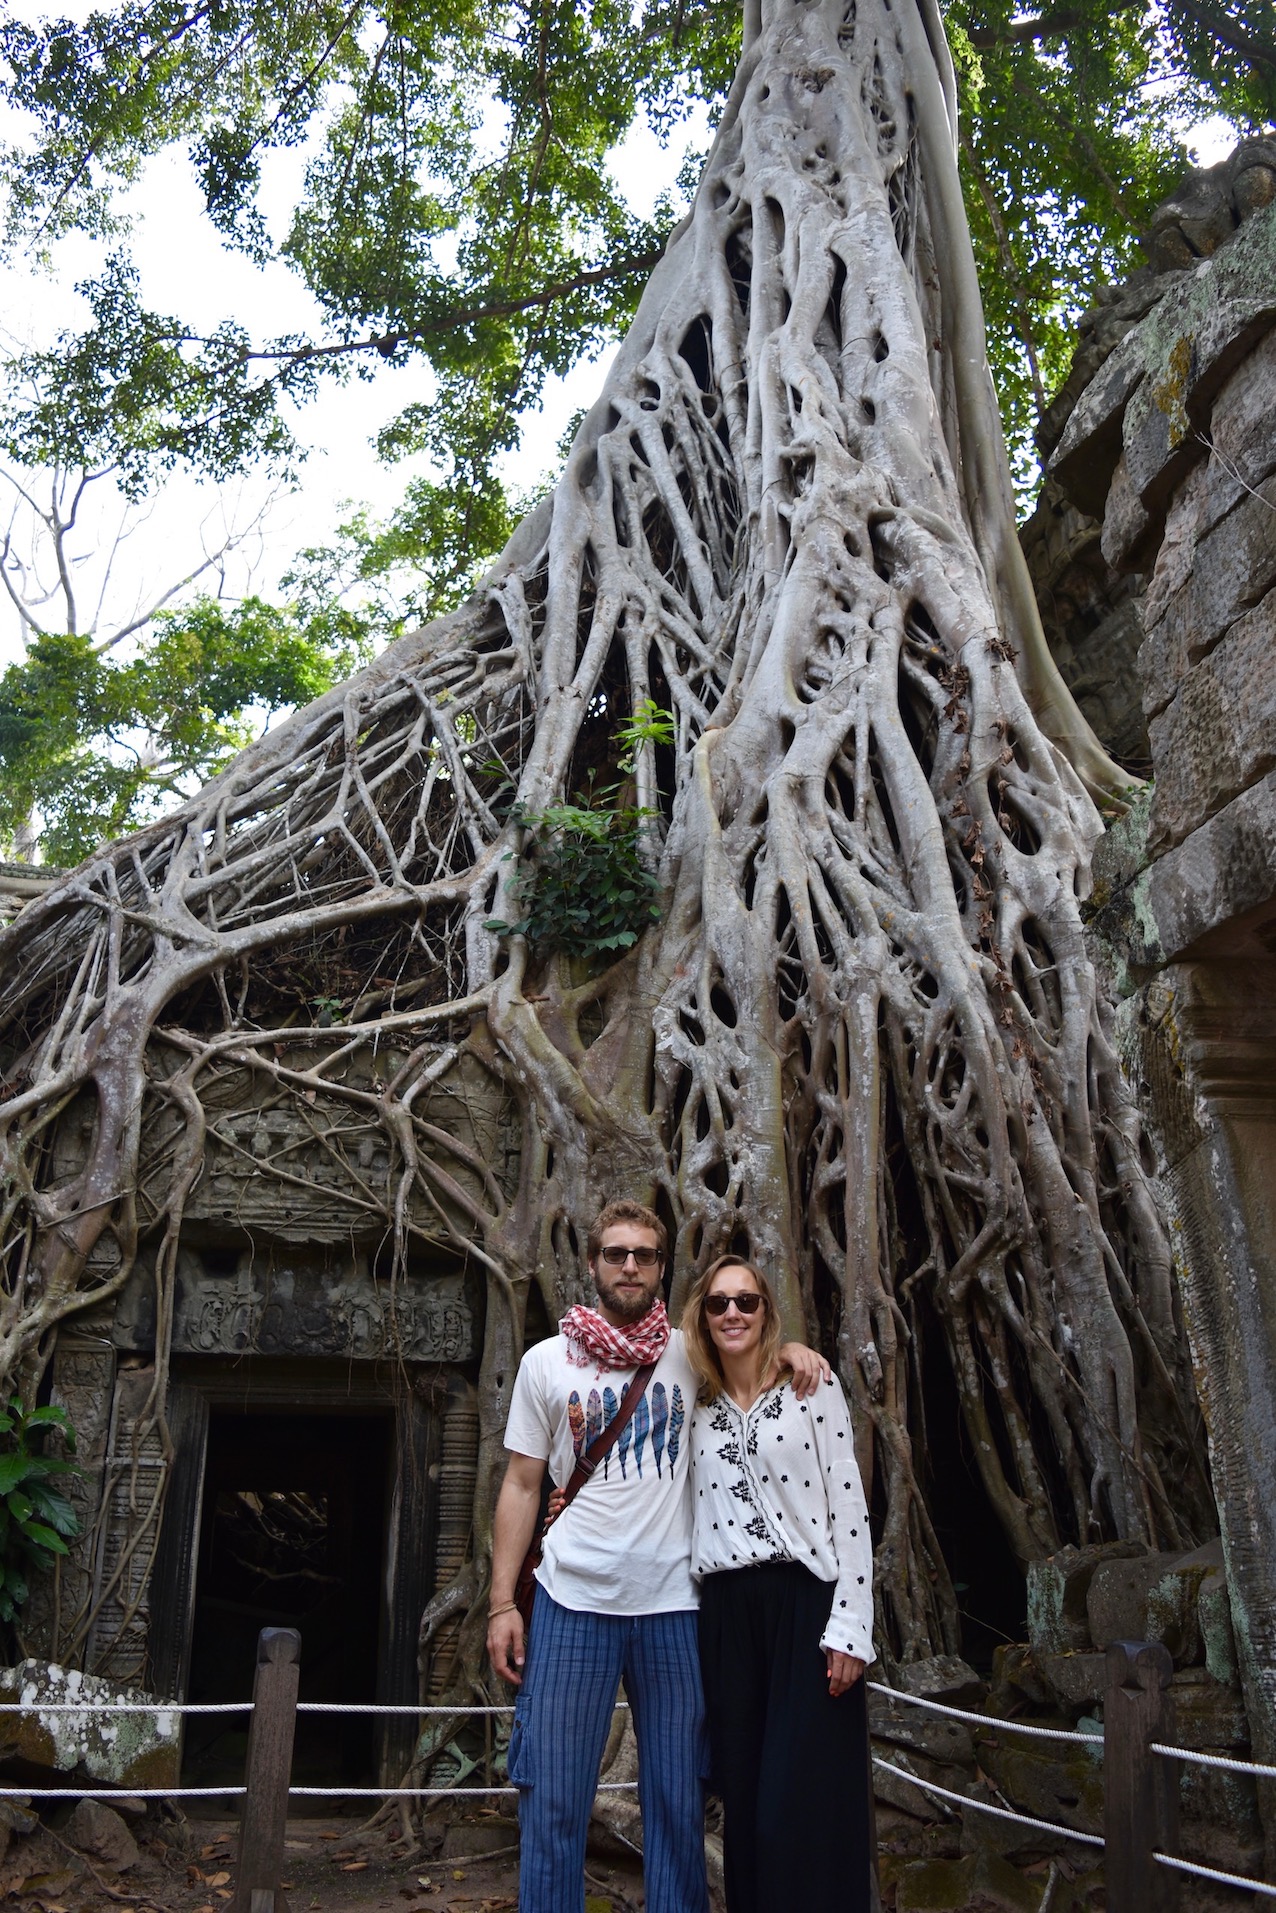 Exploring the tree covered temples in Siem reap